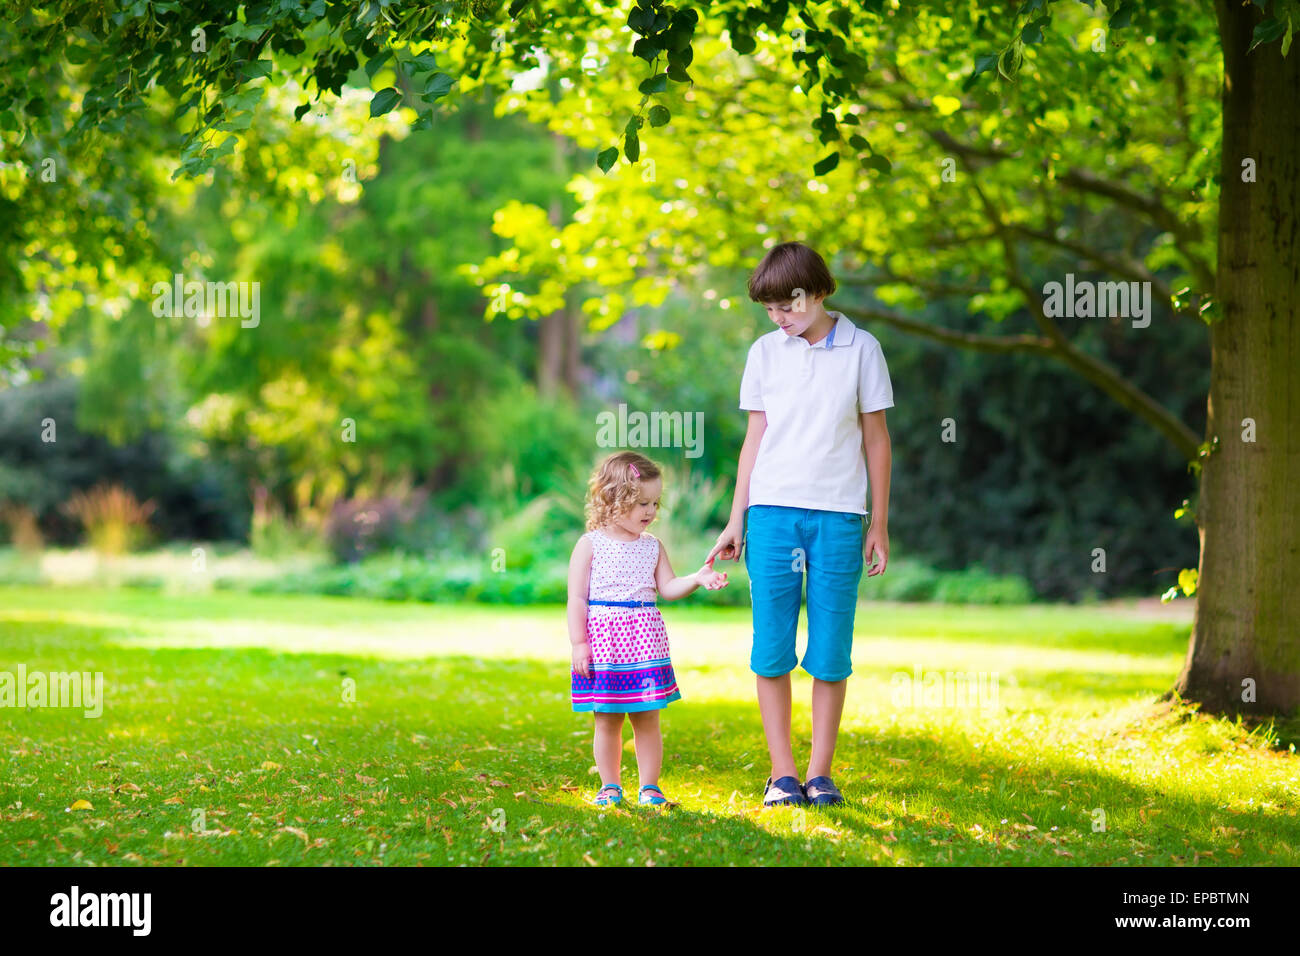 Children playing in a park. Kids holding hands walking in the forest running together playing in park Stock Photo